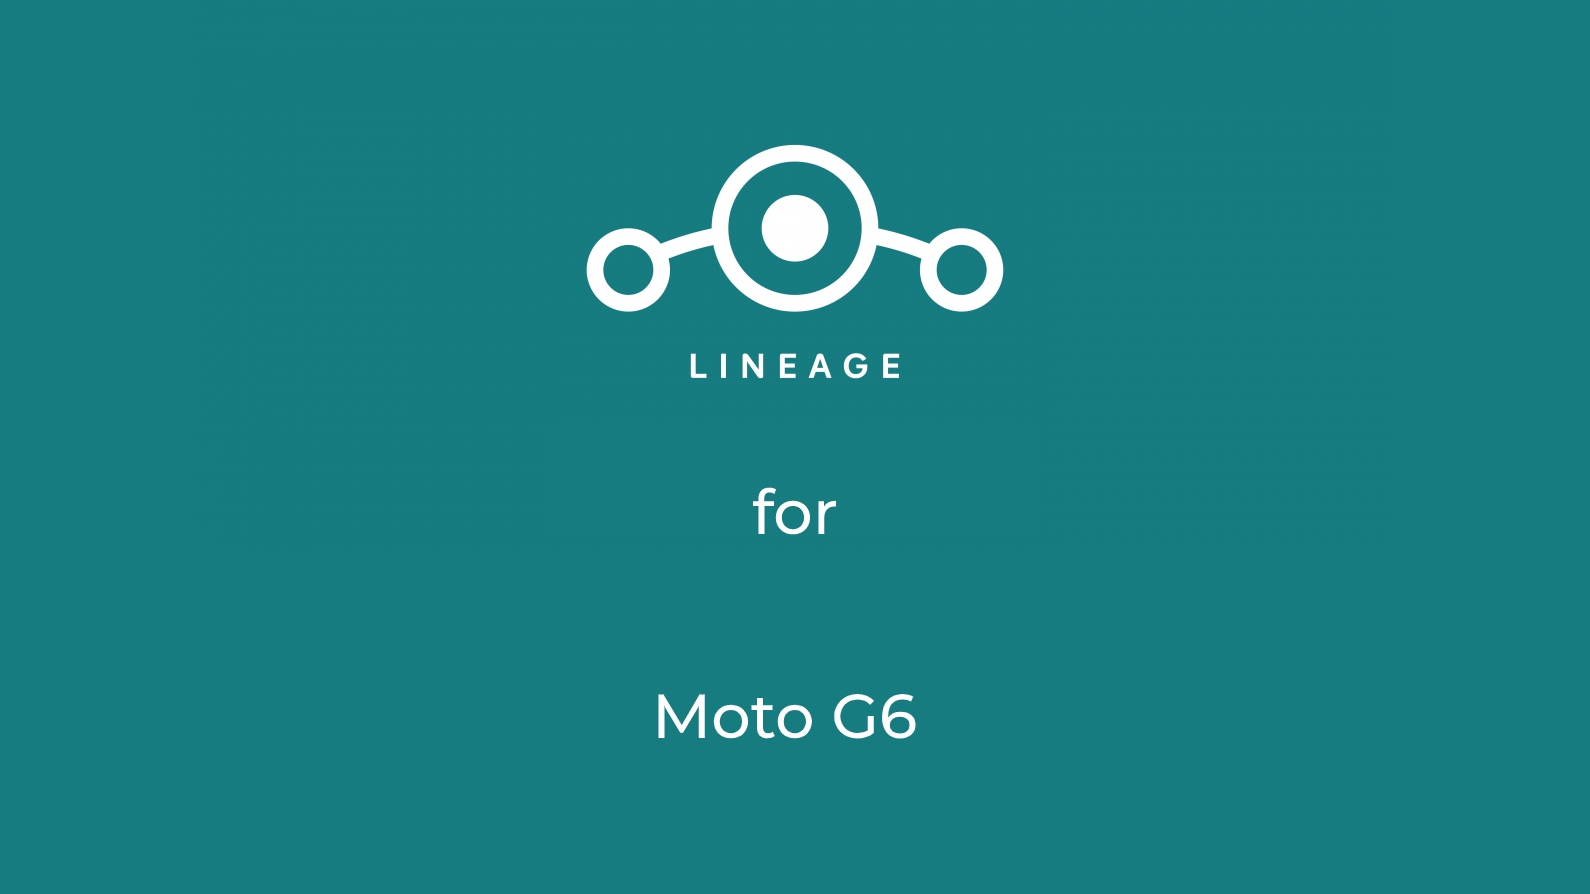 Download LineageOS for Moto G6